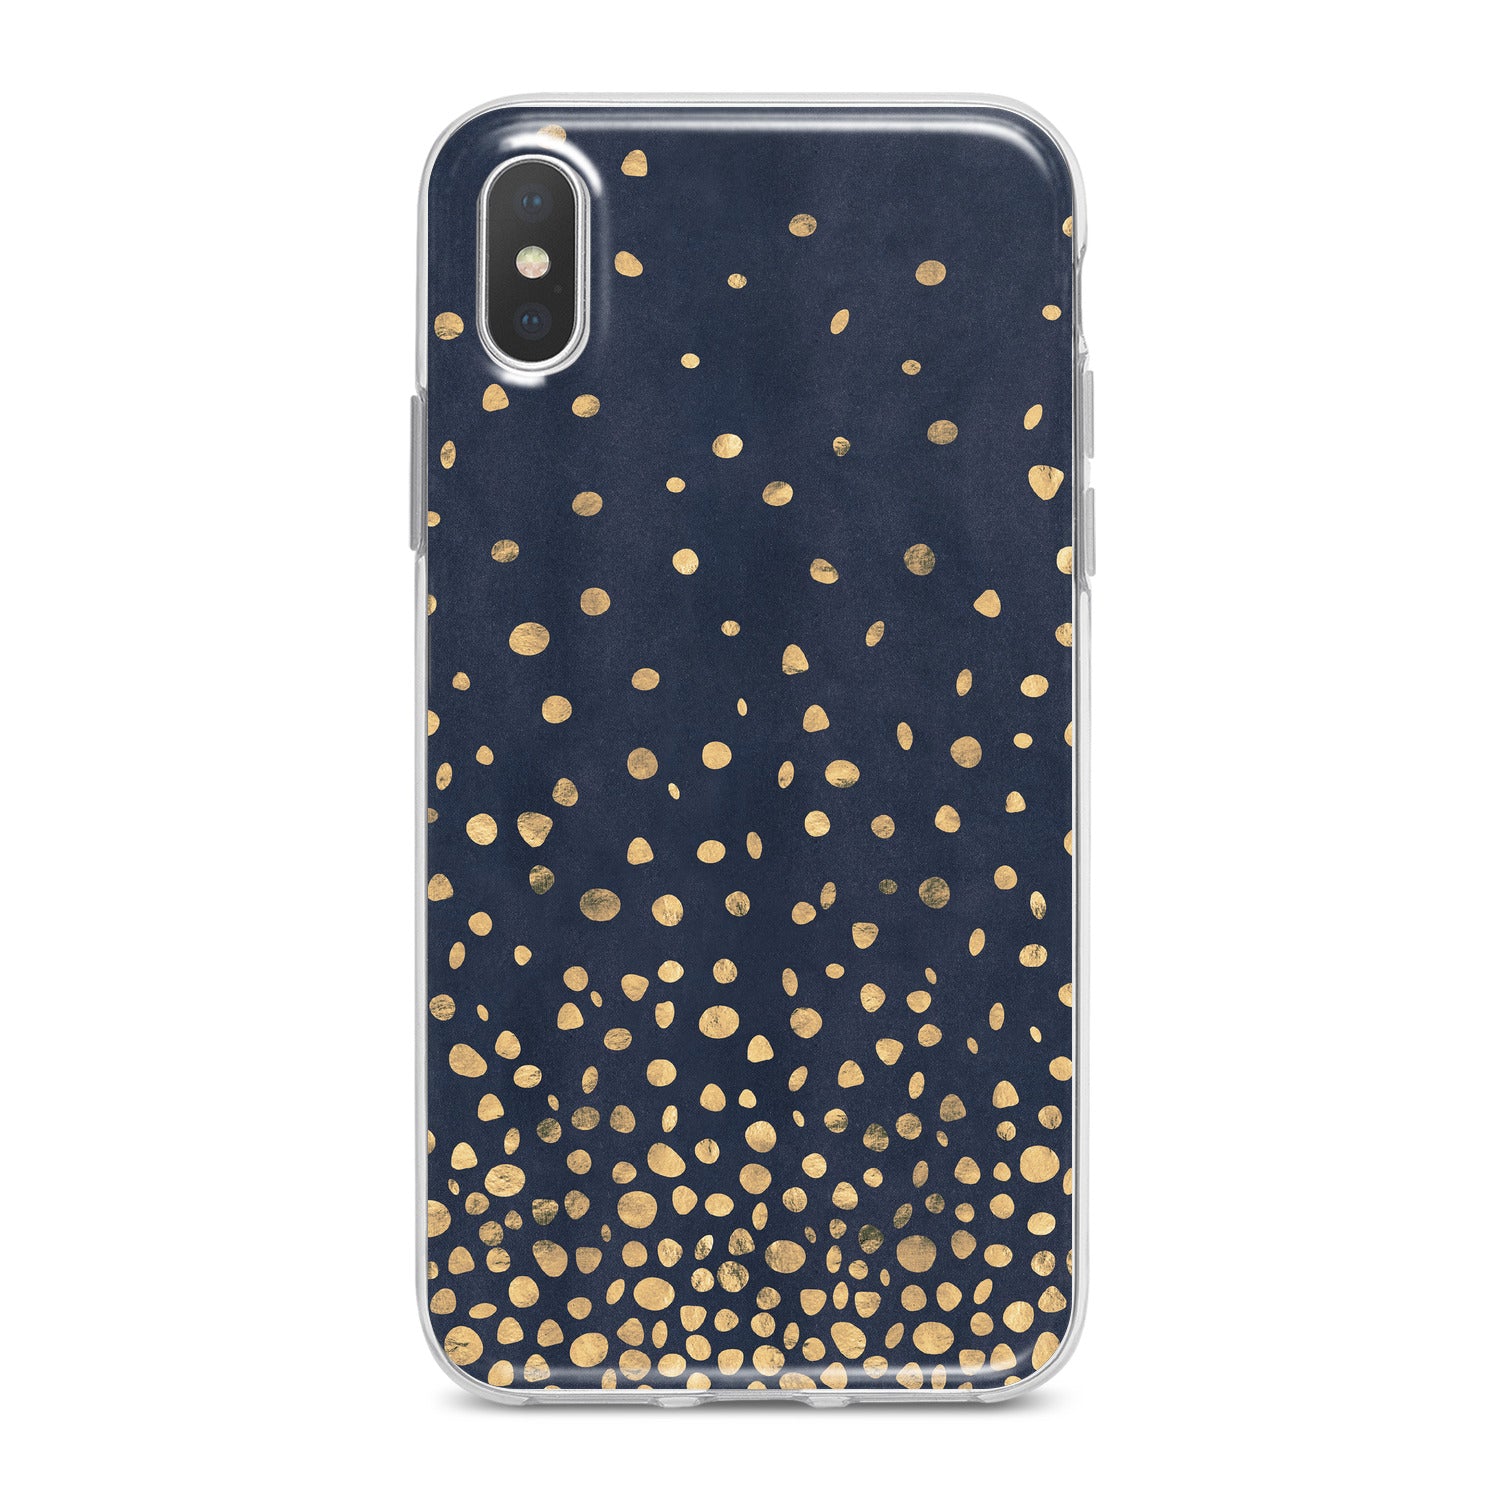 Lex Altern Amazing Golden Drops Phone Case for your iPhone & Android phone.